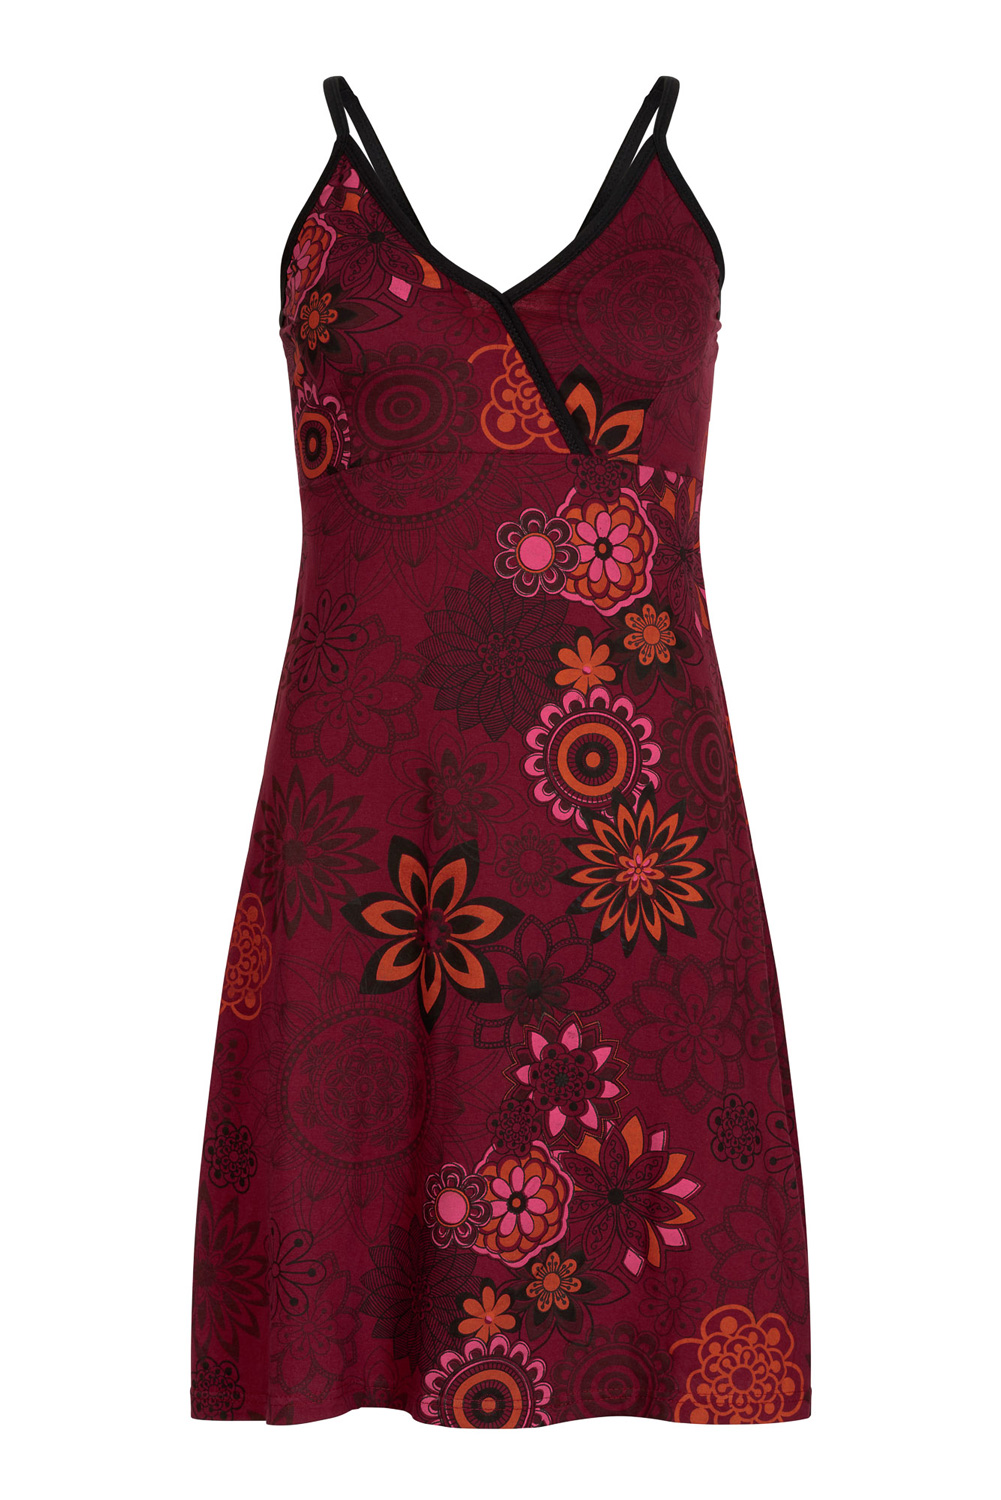 Wicked Dragon Clothing - Floral summer strappy dress